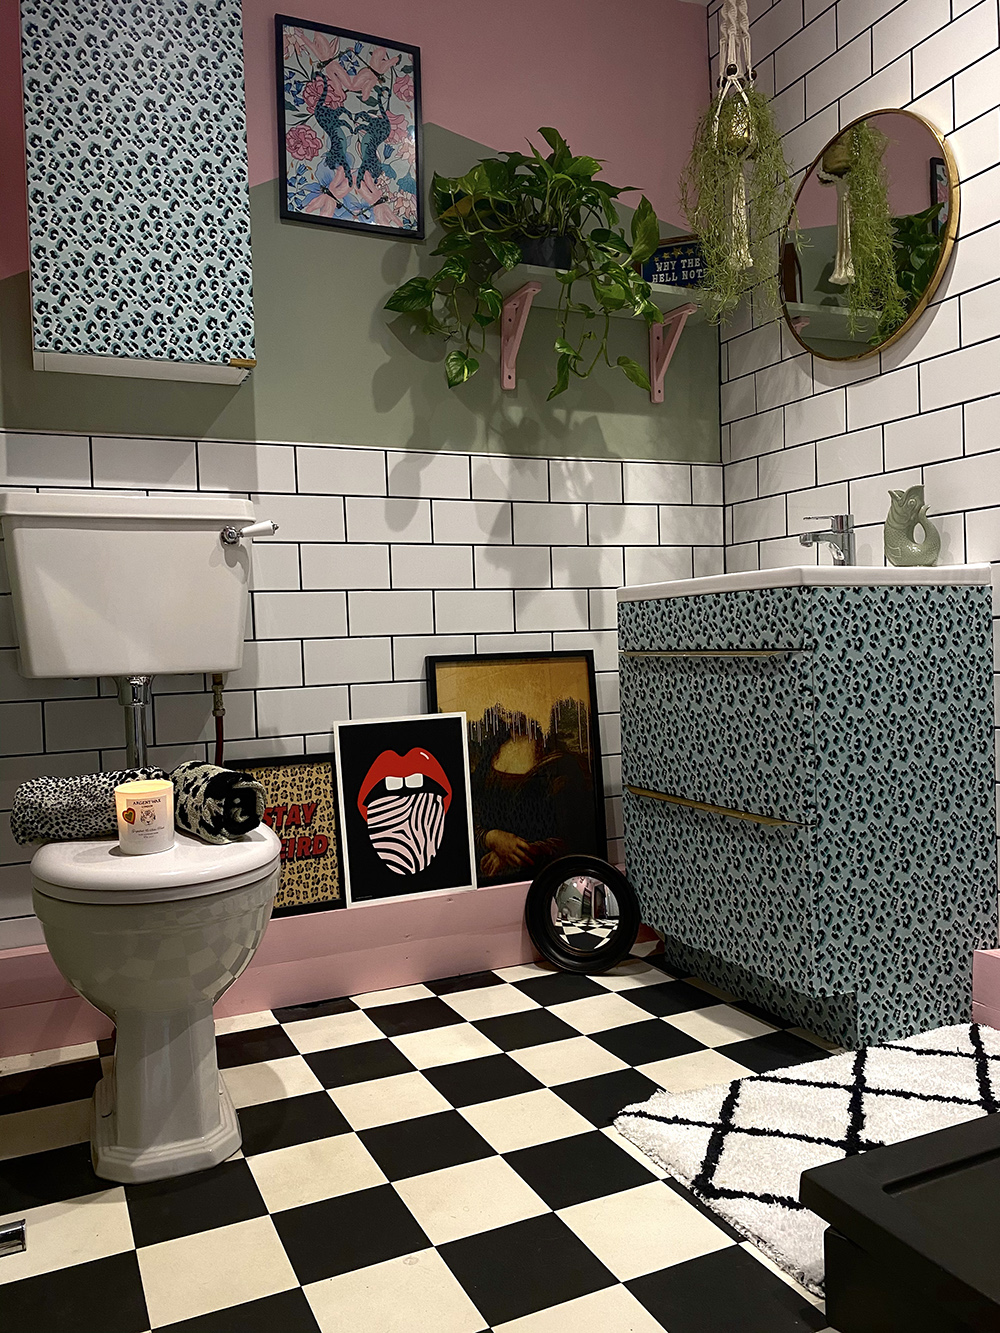 Quirky pink and green bathroom decor with black and white patterned floor tiles and gorgeous leopard print wallpaper on the furniture. By @inside.number.twelve 